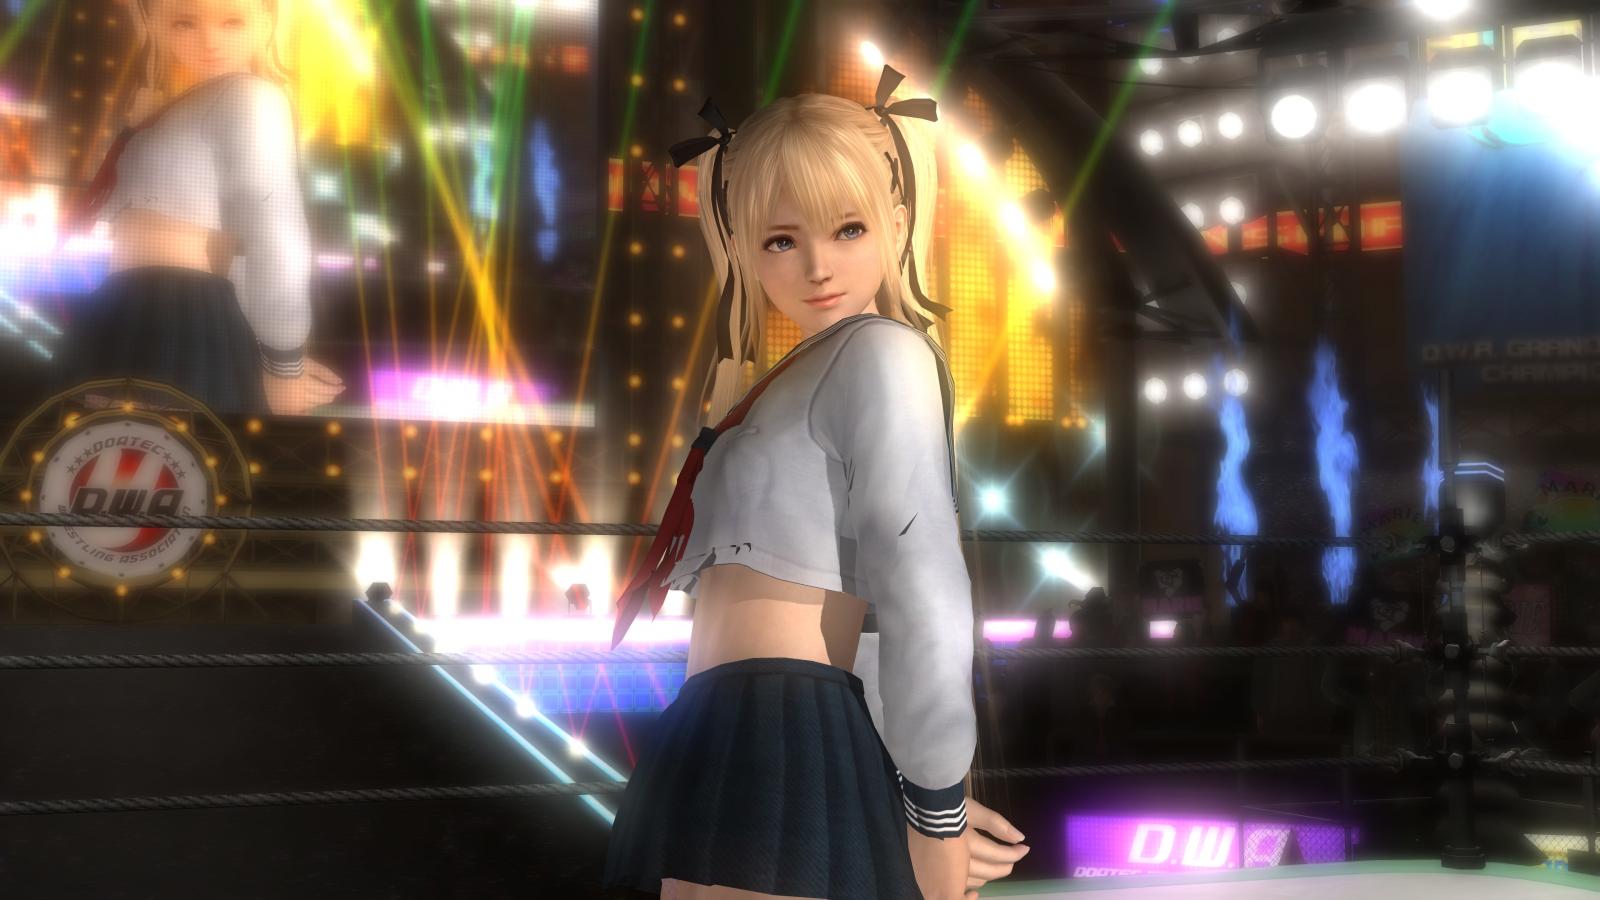 [doa5lr] Timmy S Private Stash Tips And Tools Update 11 21 18 Kinky